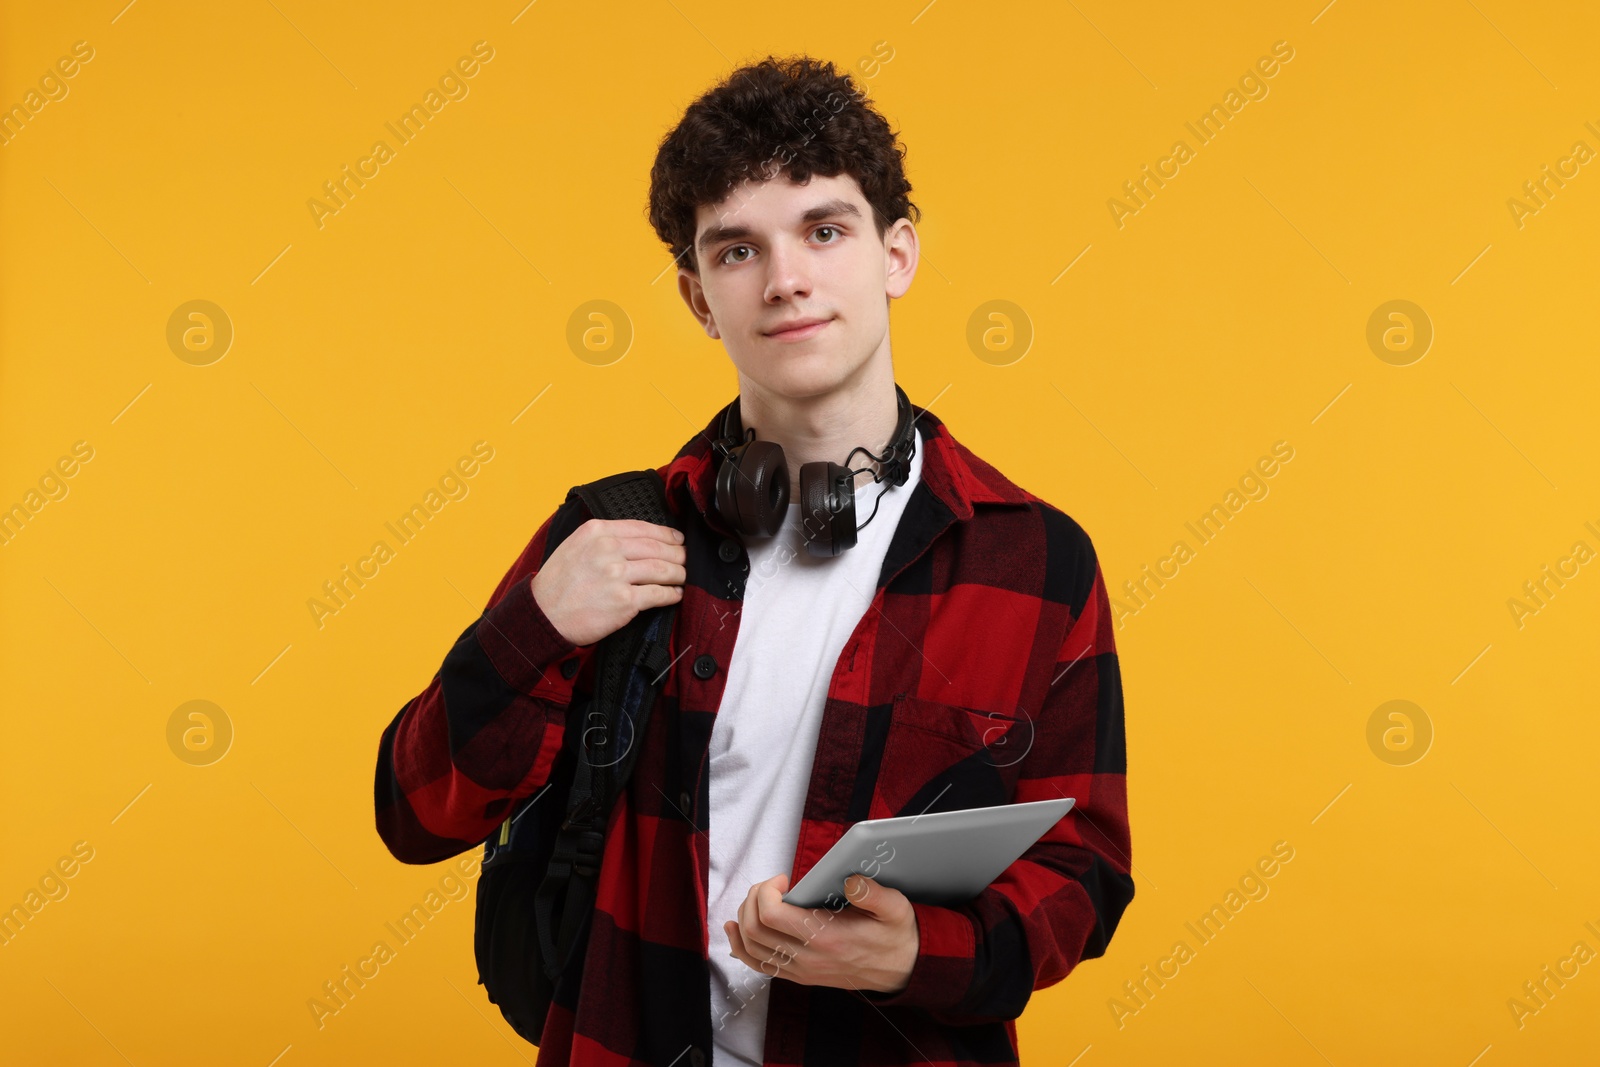 Photo of Portrait of student with backpack, headphones and tablet on orange background